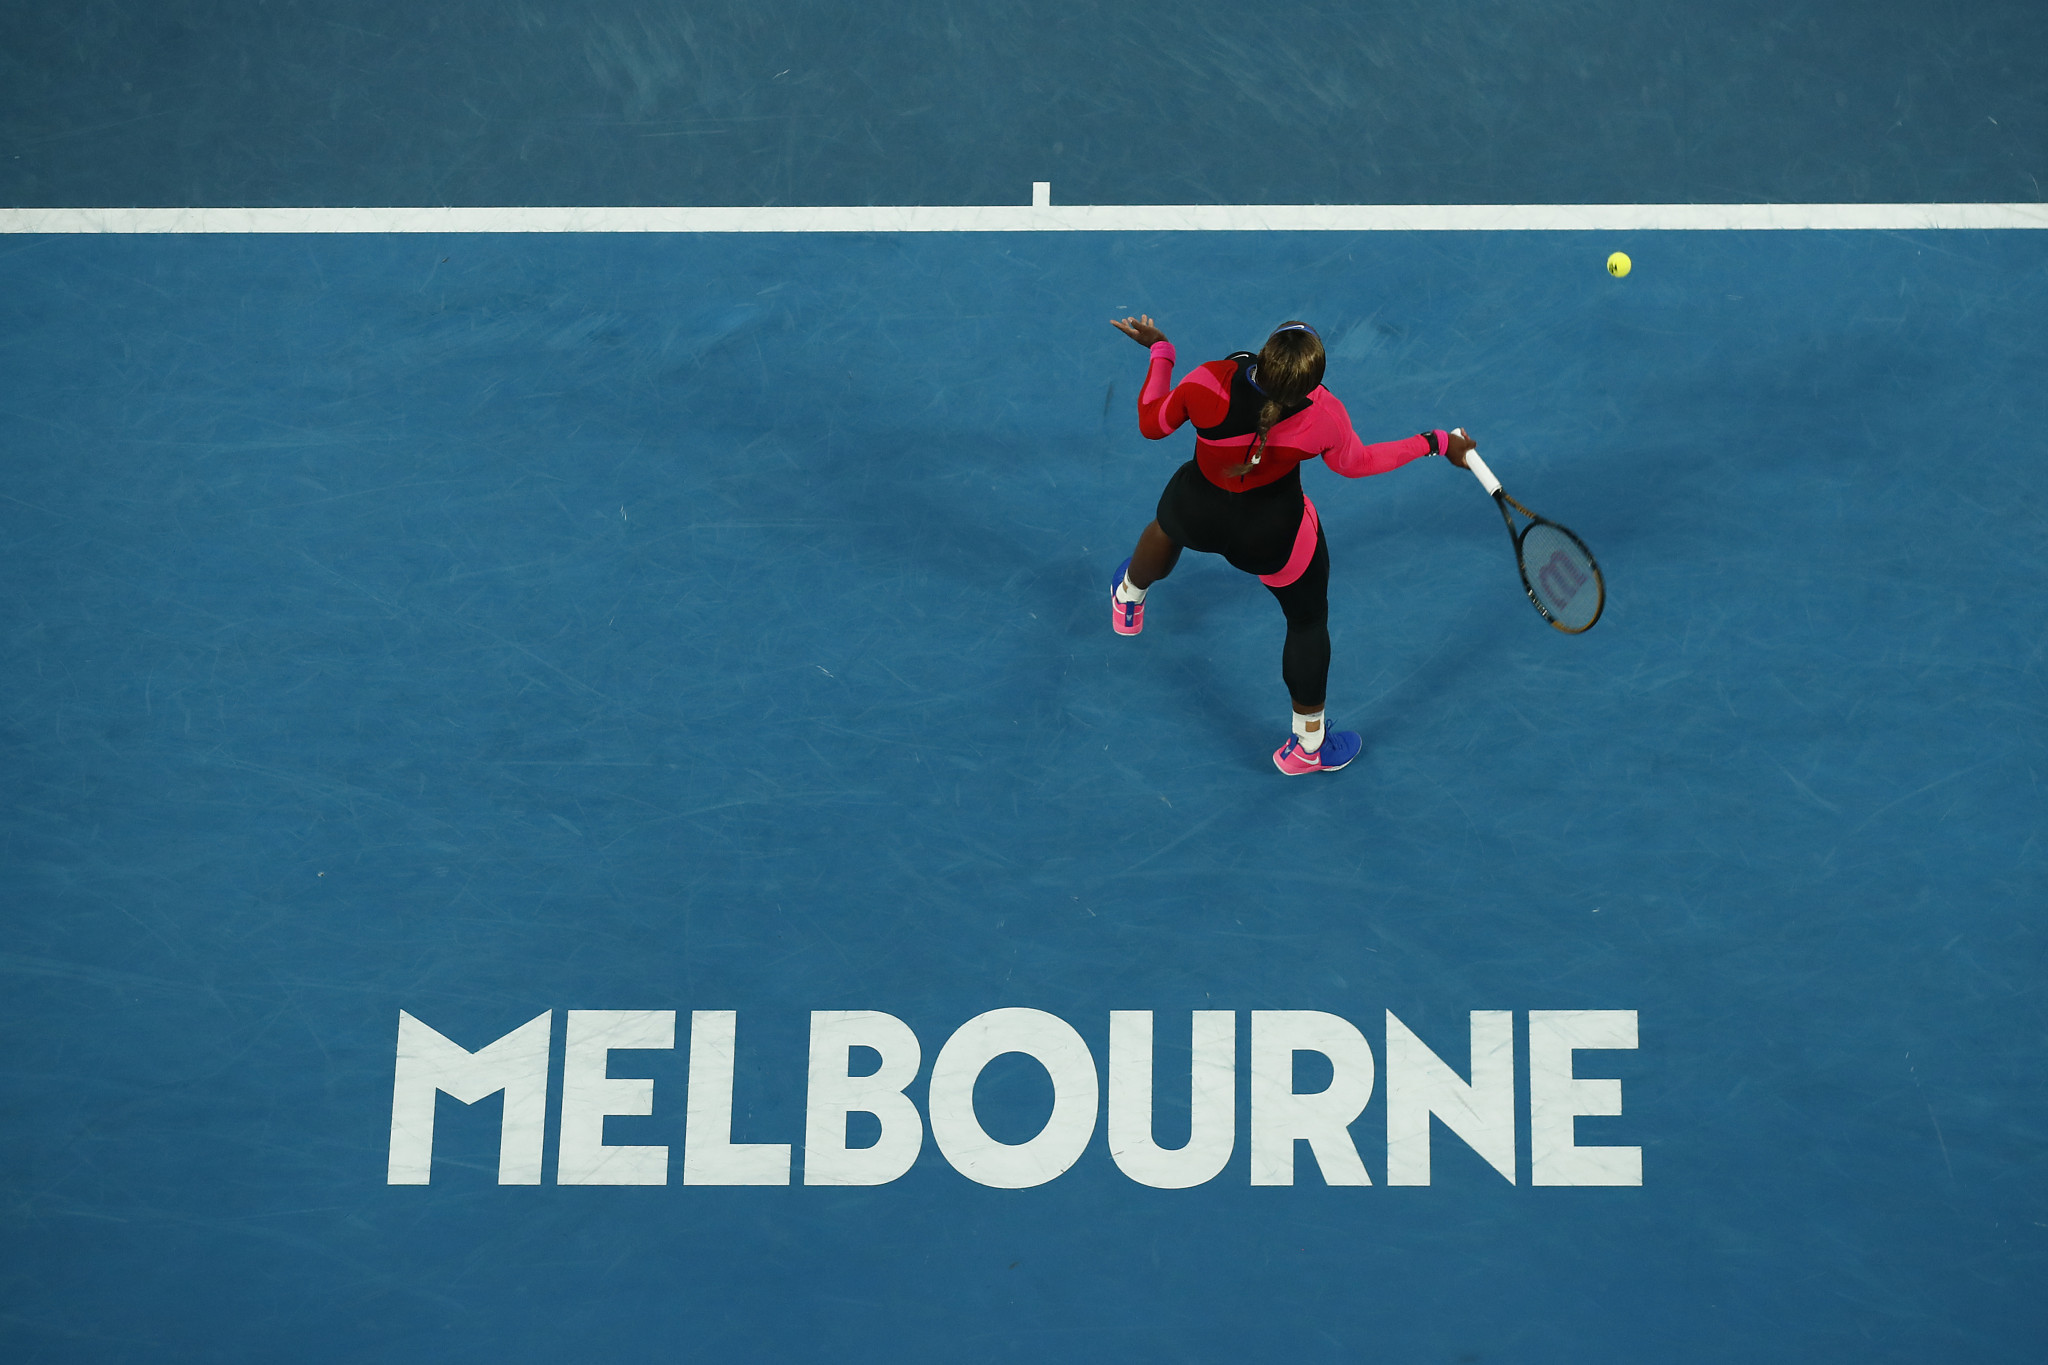 Williams continues quest for 24th Grand Slam title at Australian Open